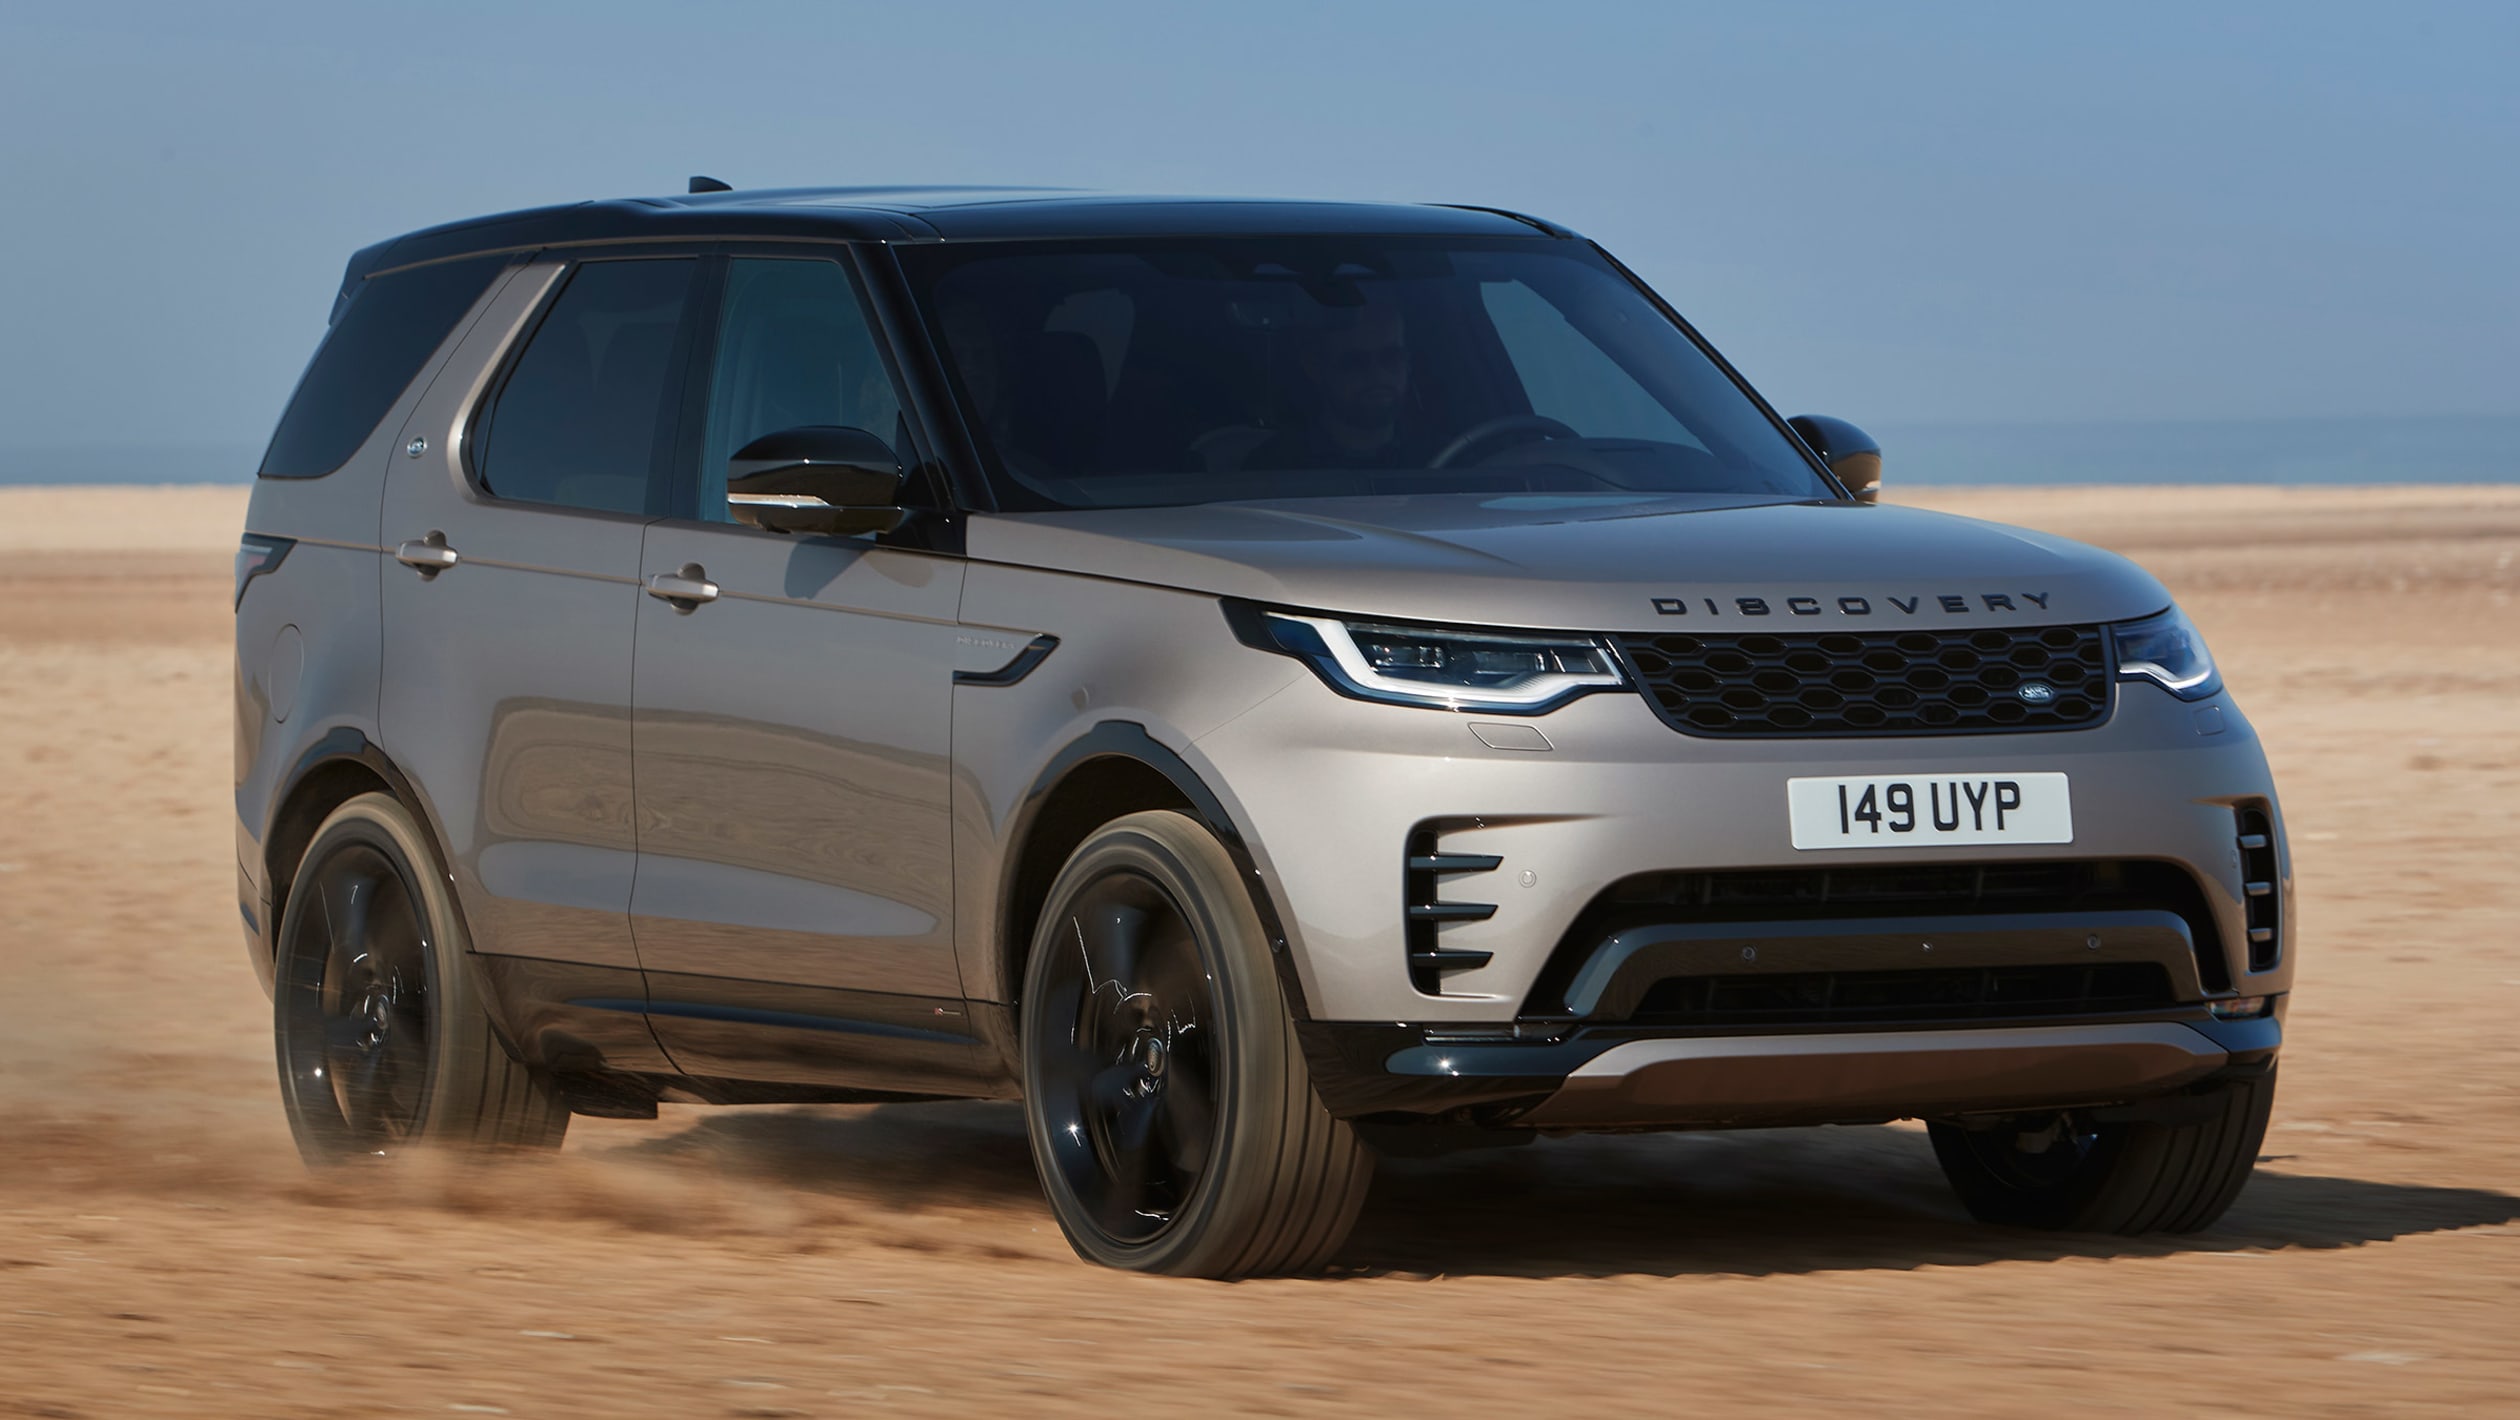 aria-label="New Land Rover Discovery facelift 2020 11"